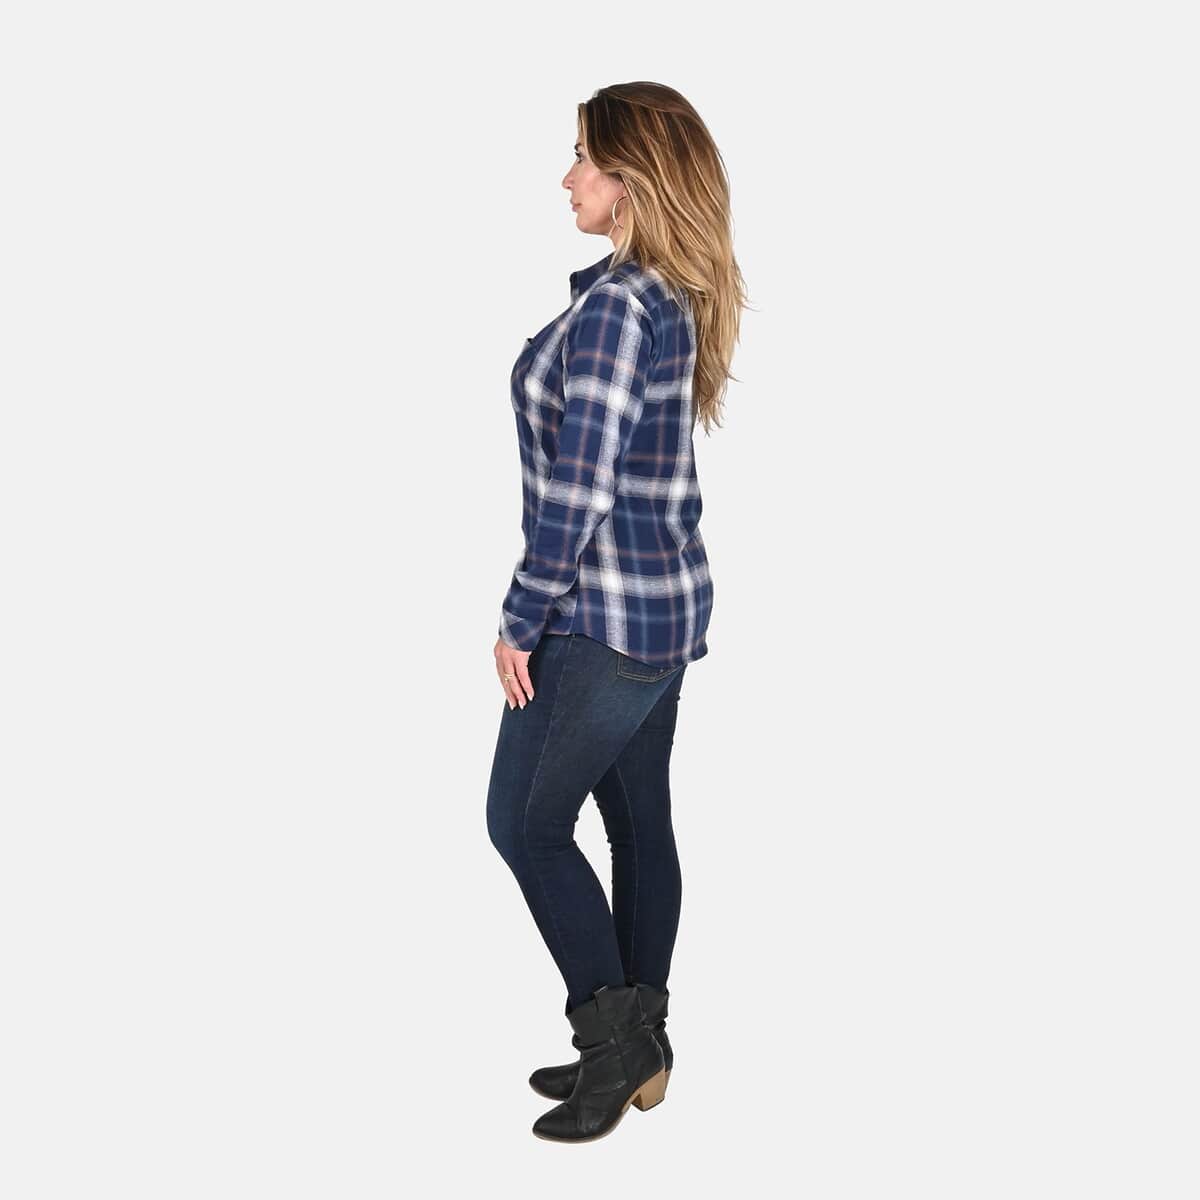 Victory Sportswear Blue and White Plaid Pattern Cotton Flannel Shirt - L image number 2